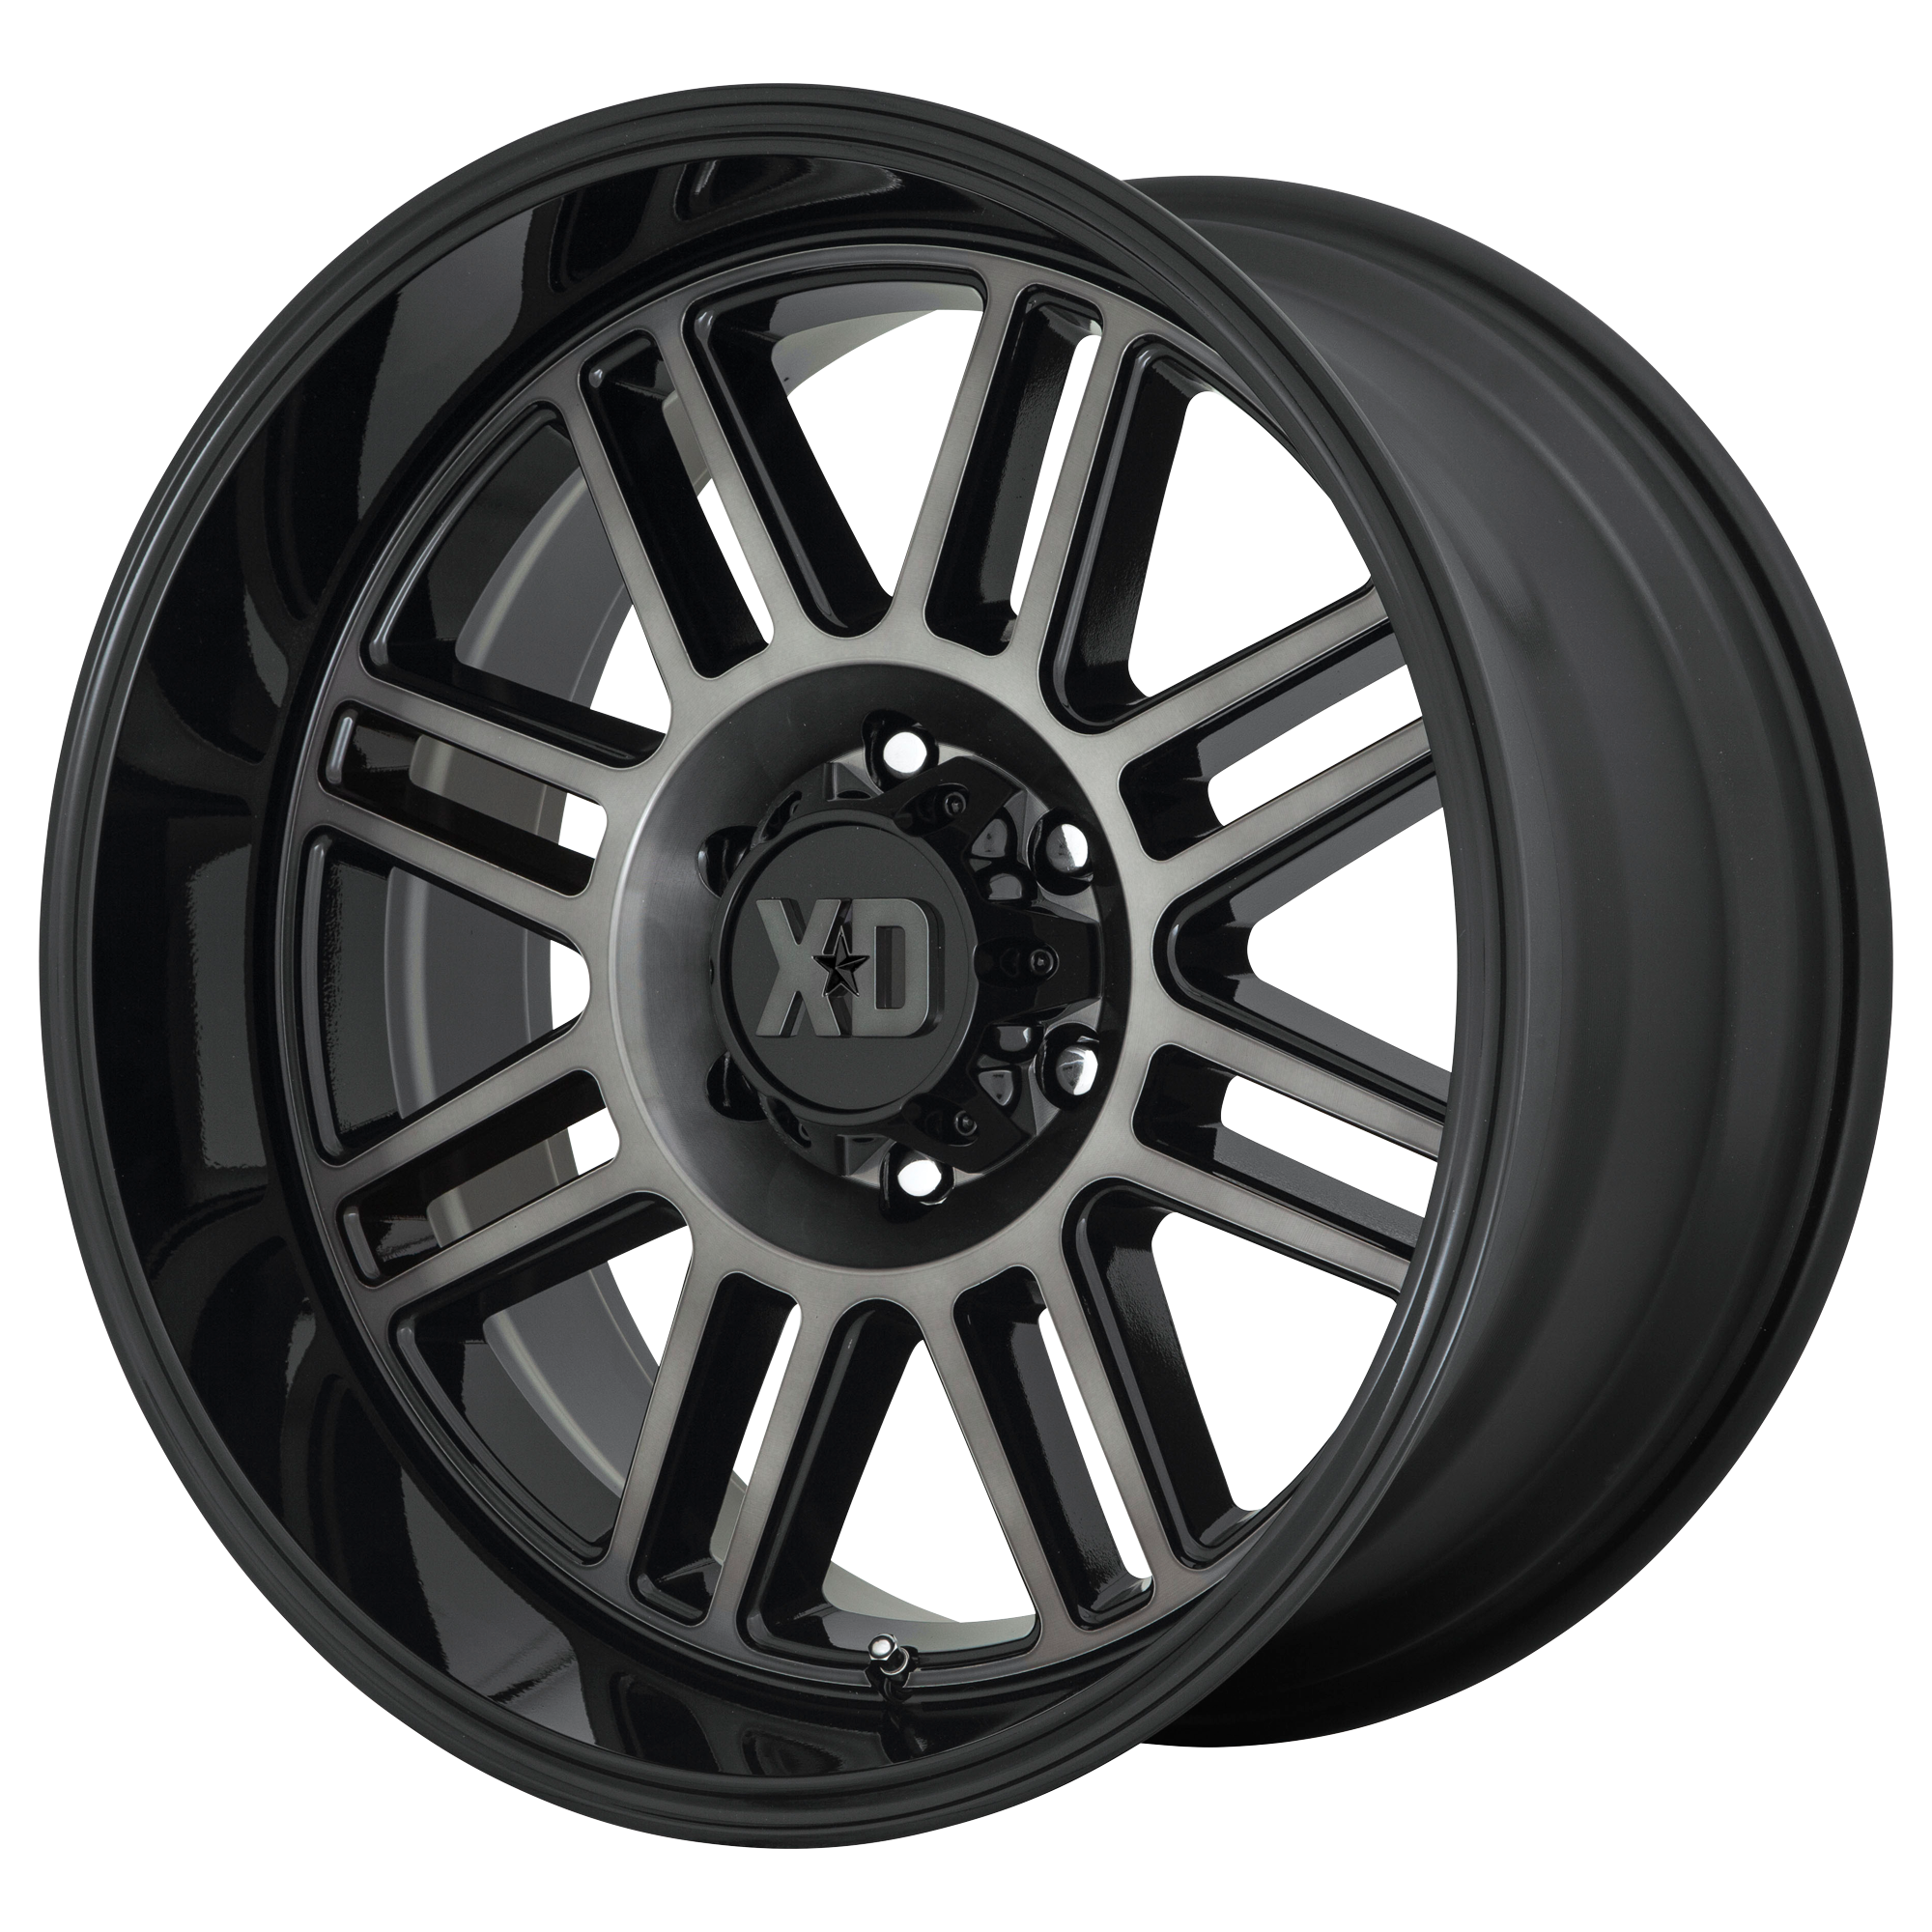 CAGE 20x9 8x165.10 GLOSS BLACK W/ GRAY TINT (18 mm) - Tires and Engine Performance